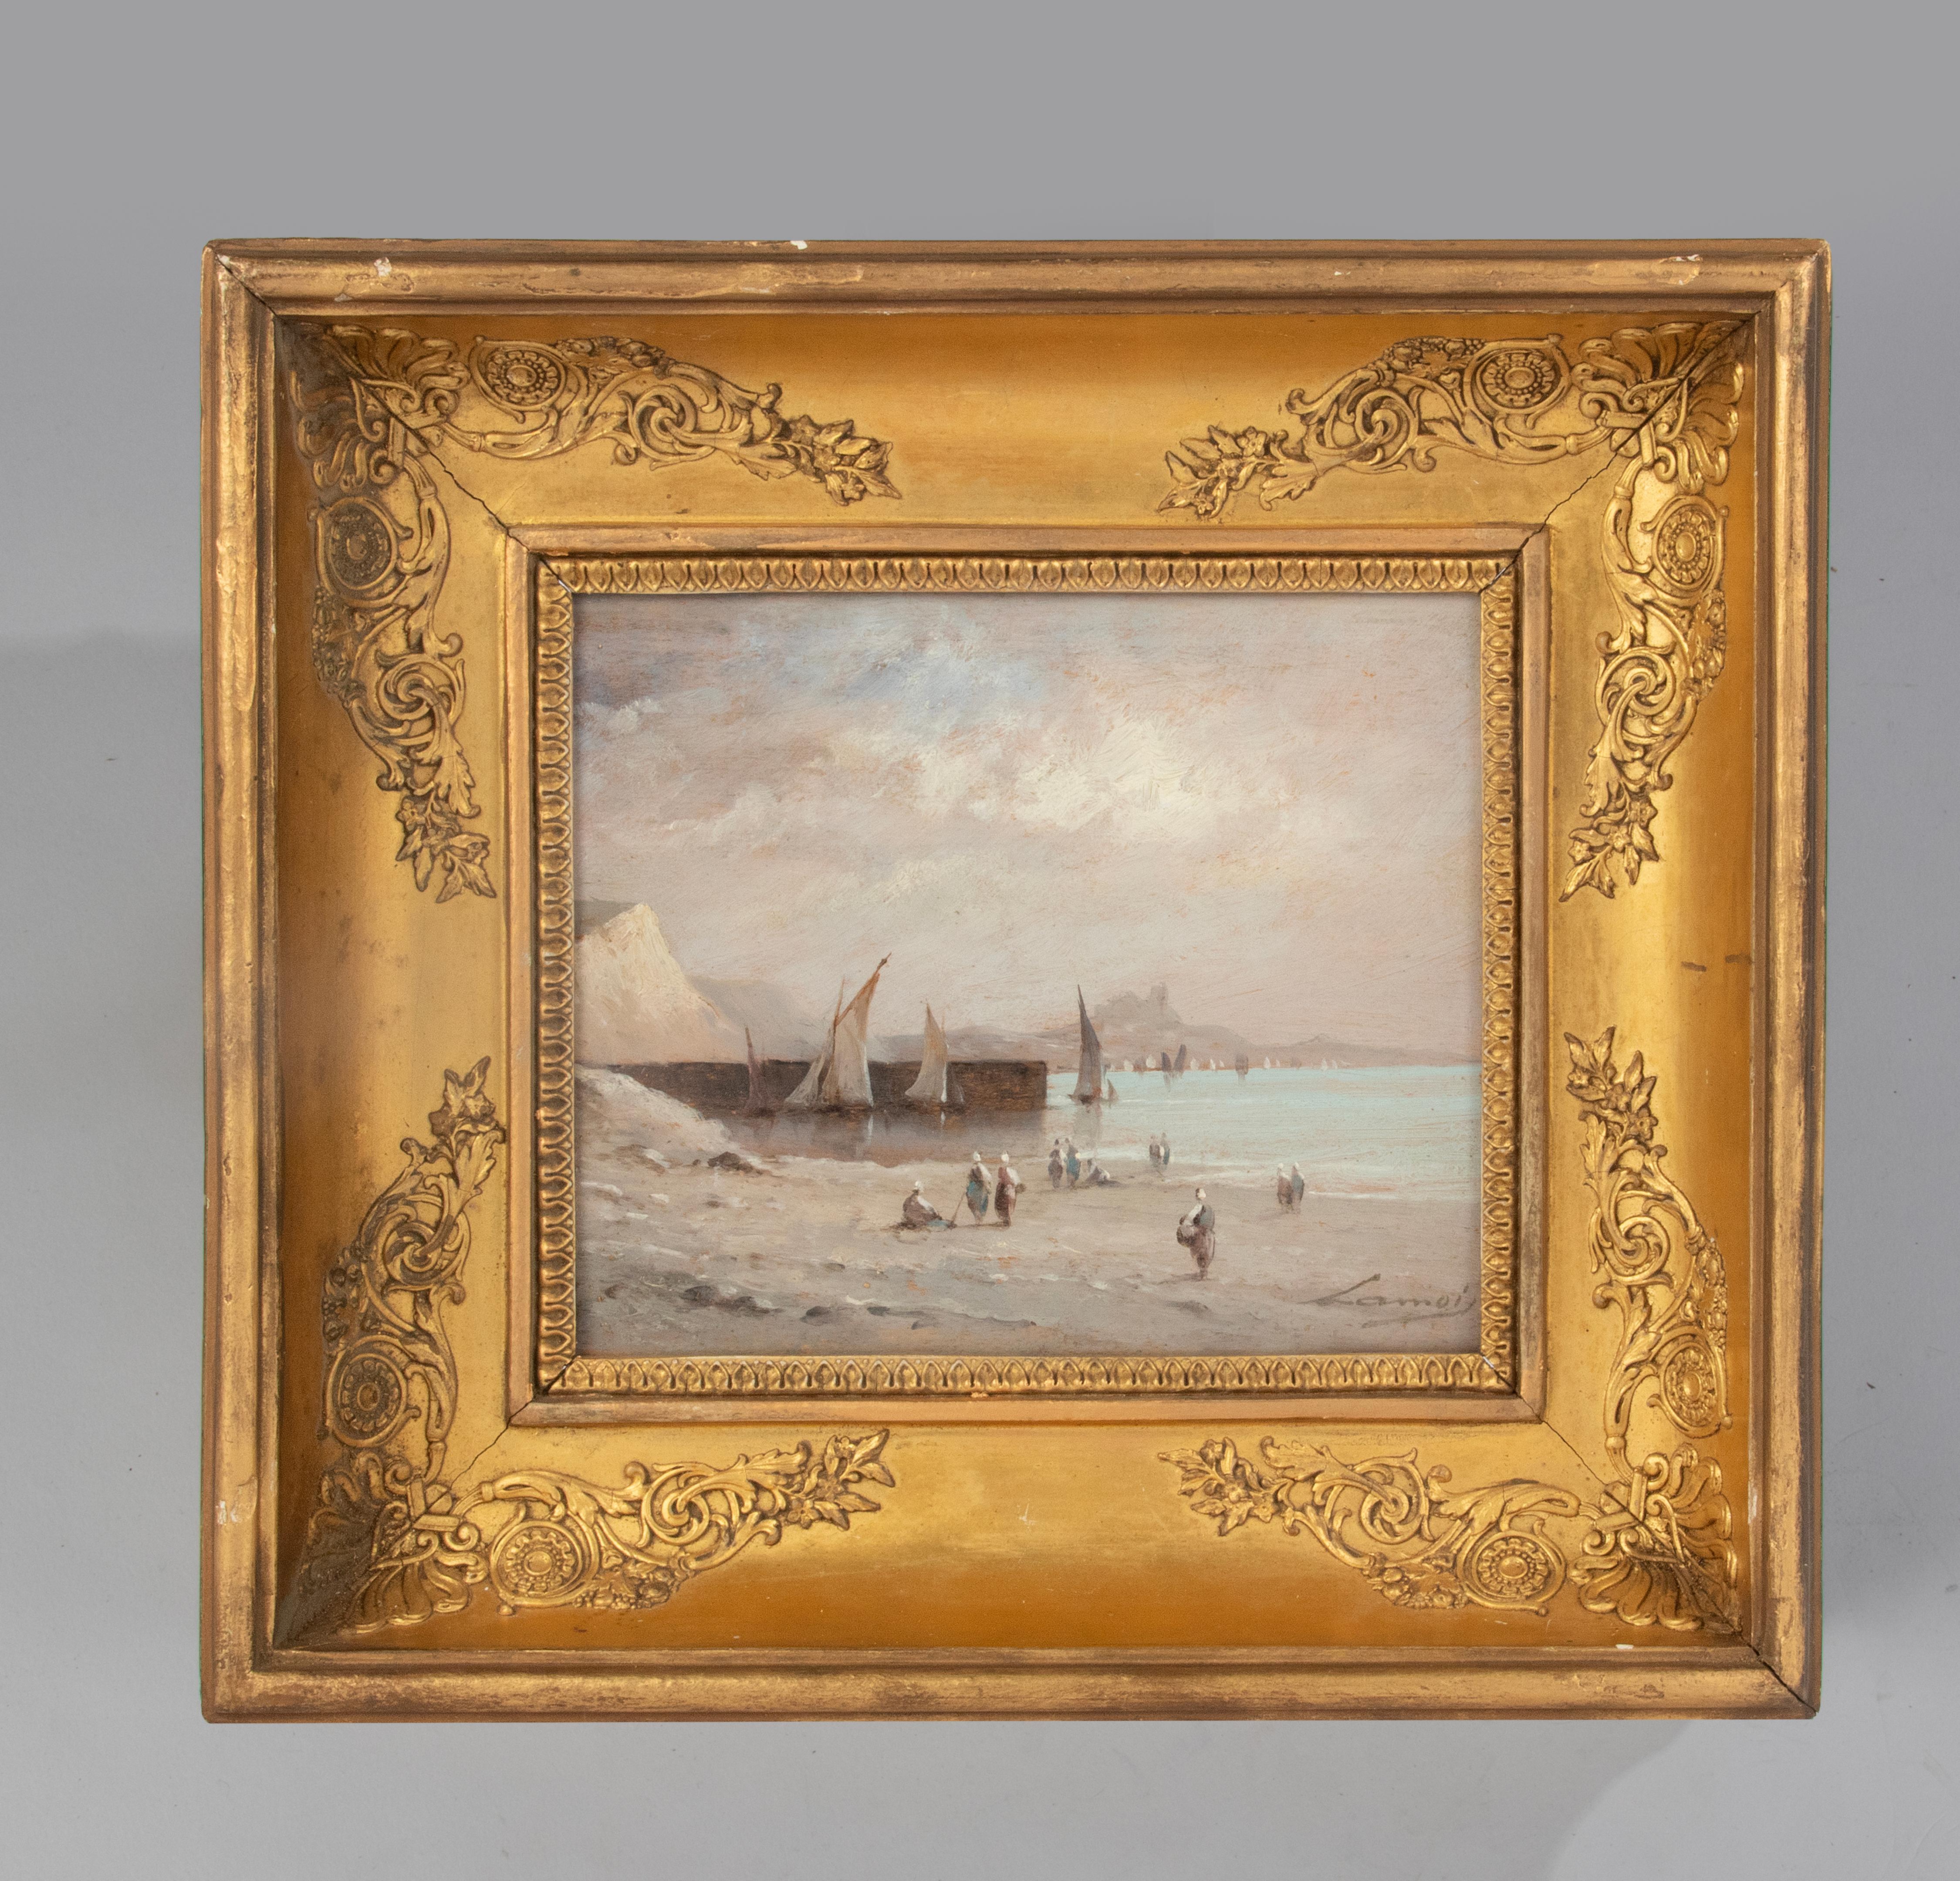 A finely painted seascape with fishing boats. The fishermen's wives waited on the beach to help their husbands. Paintd on a walnut panel. Signed lower right; Lamoi. In an gilt wooden frame in Charles X style. Information about the painter is